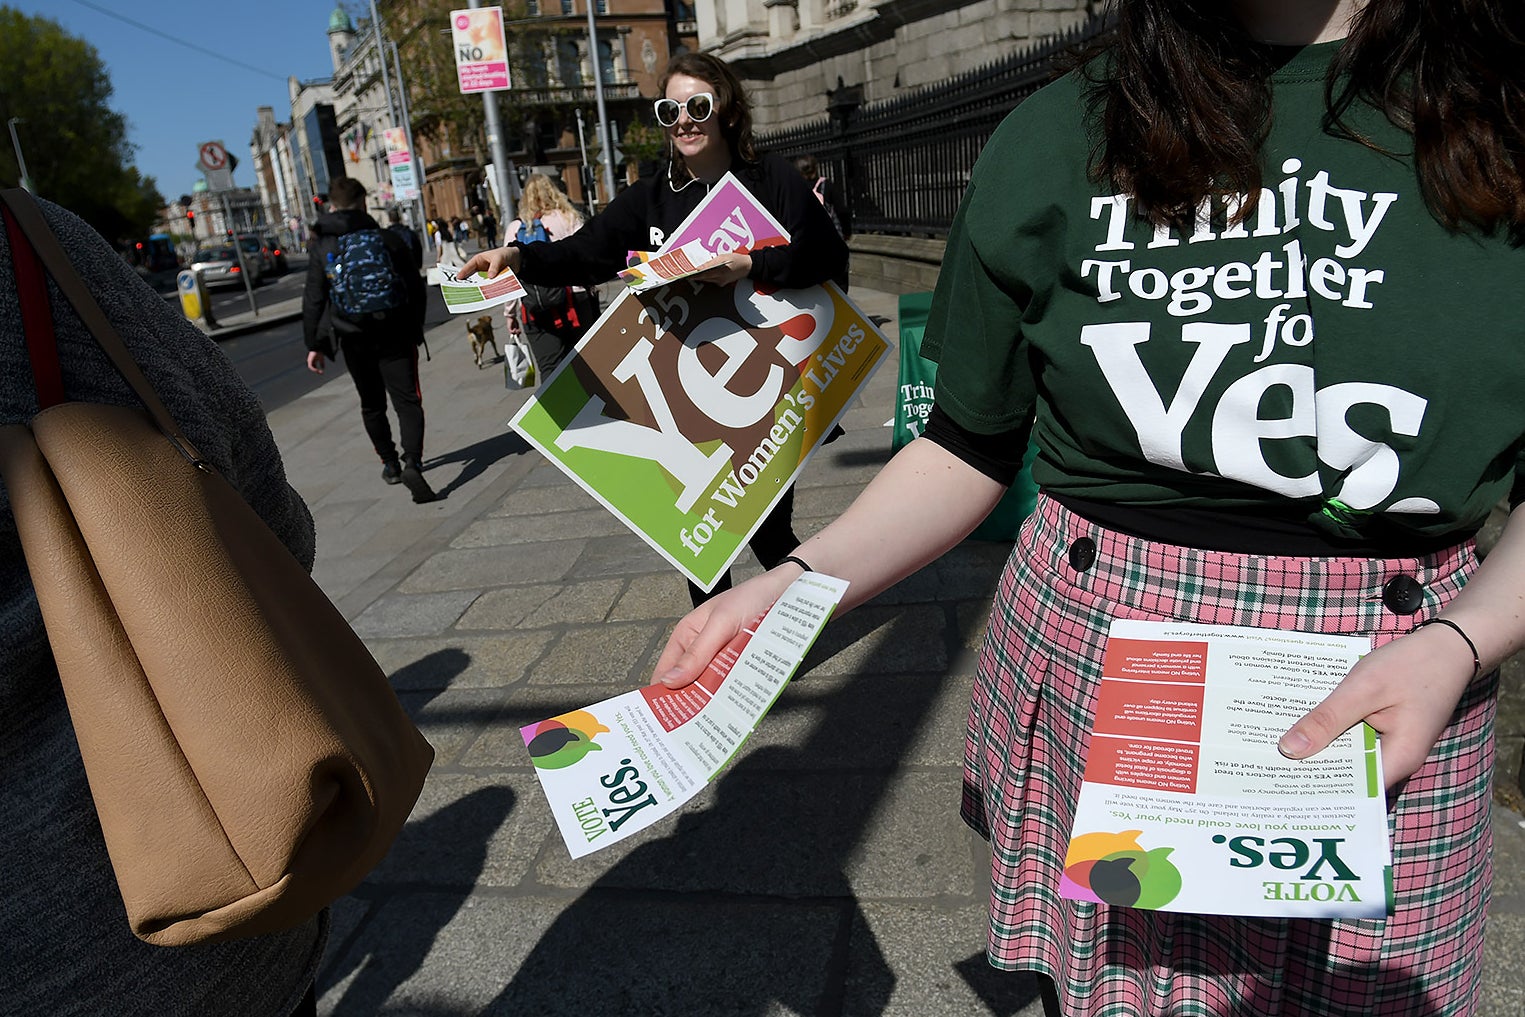 Women handing out flyers and posters branded with the word "Yes!"